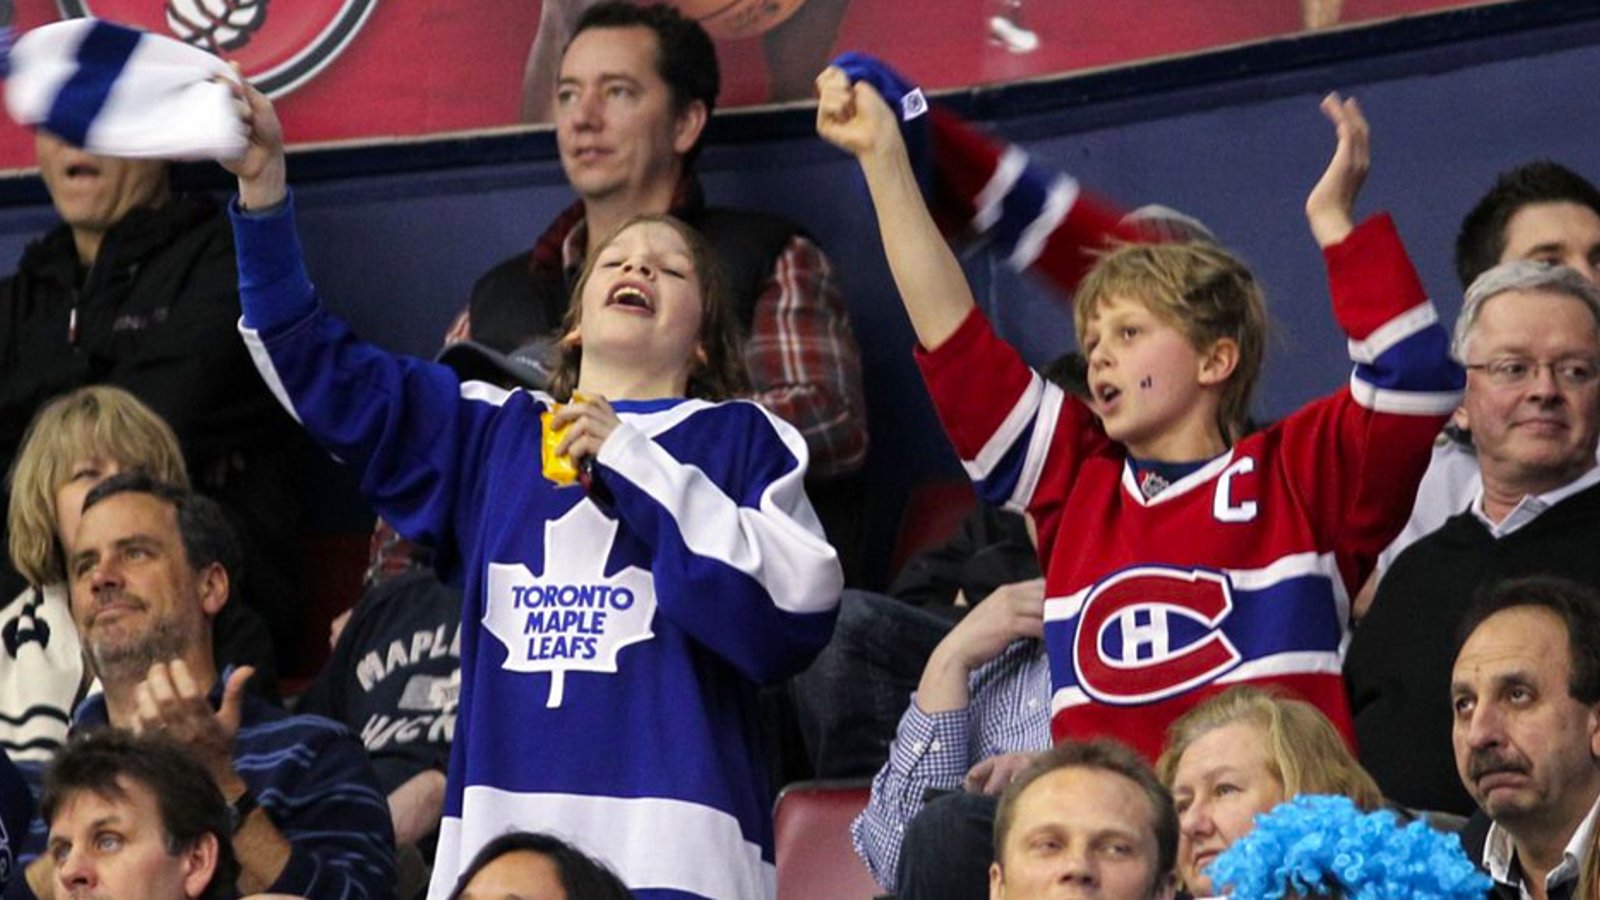 Fans coming to Canadiens vs Leafs playoff series